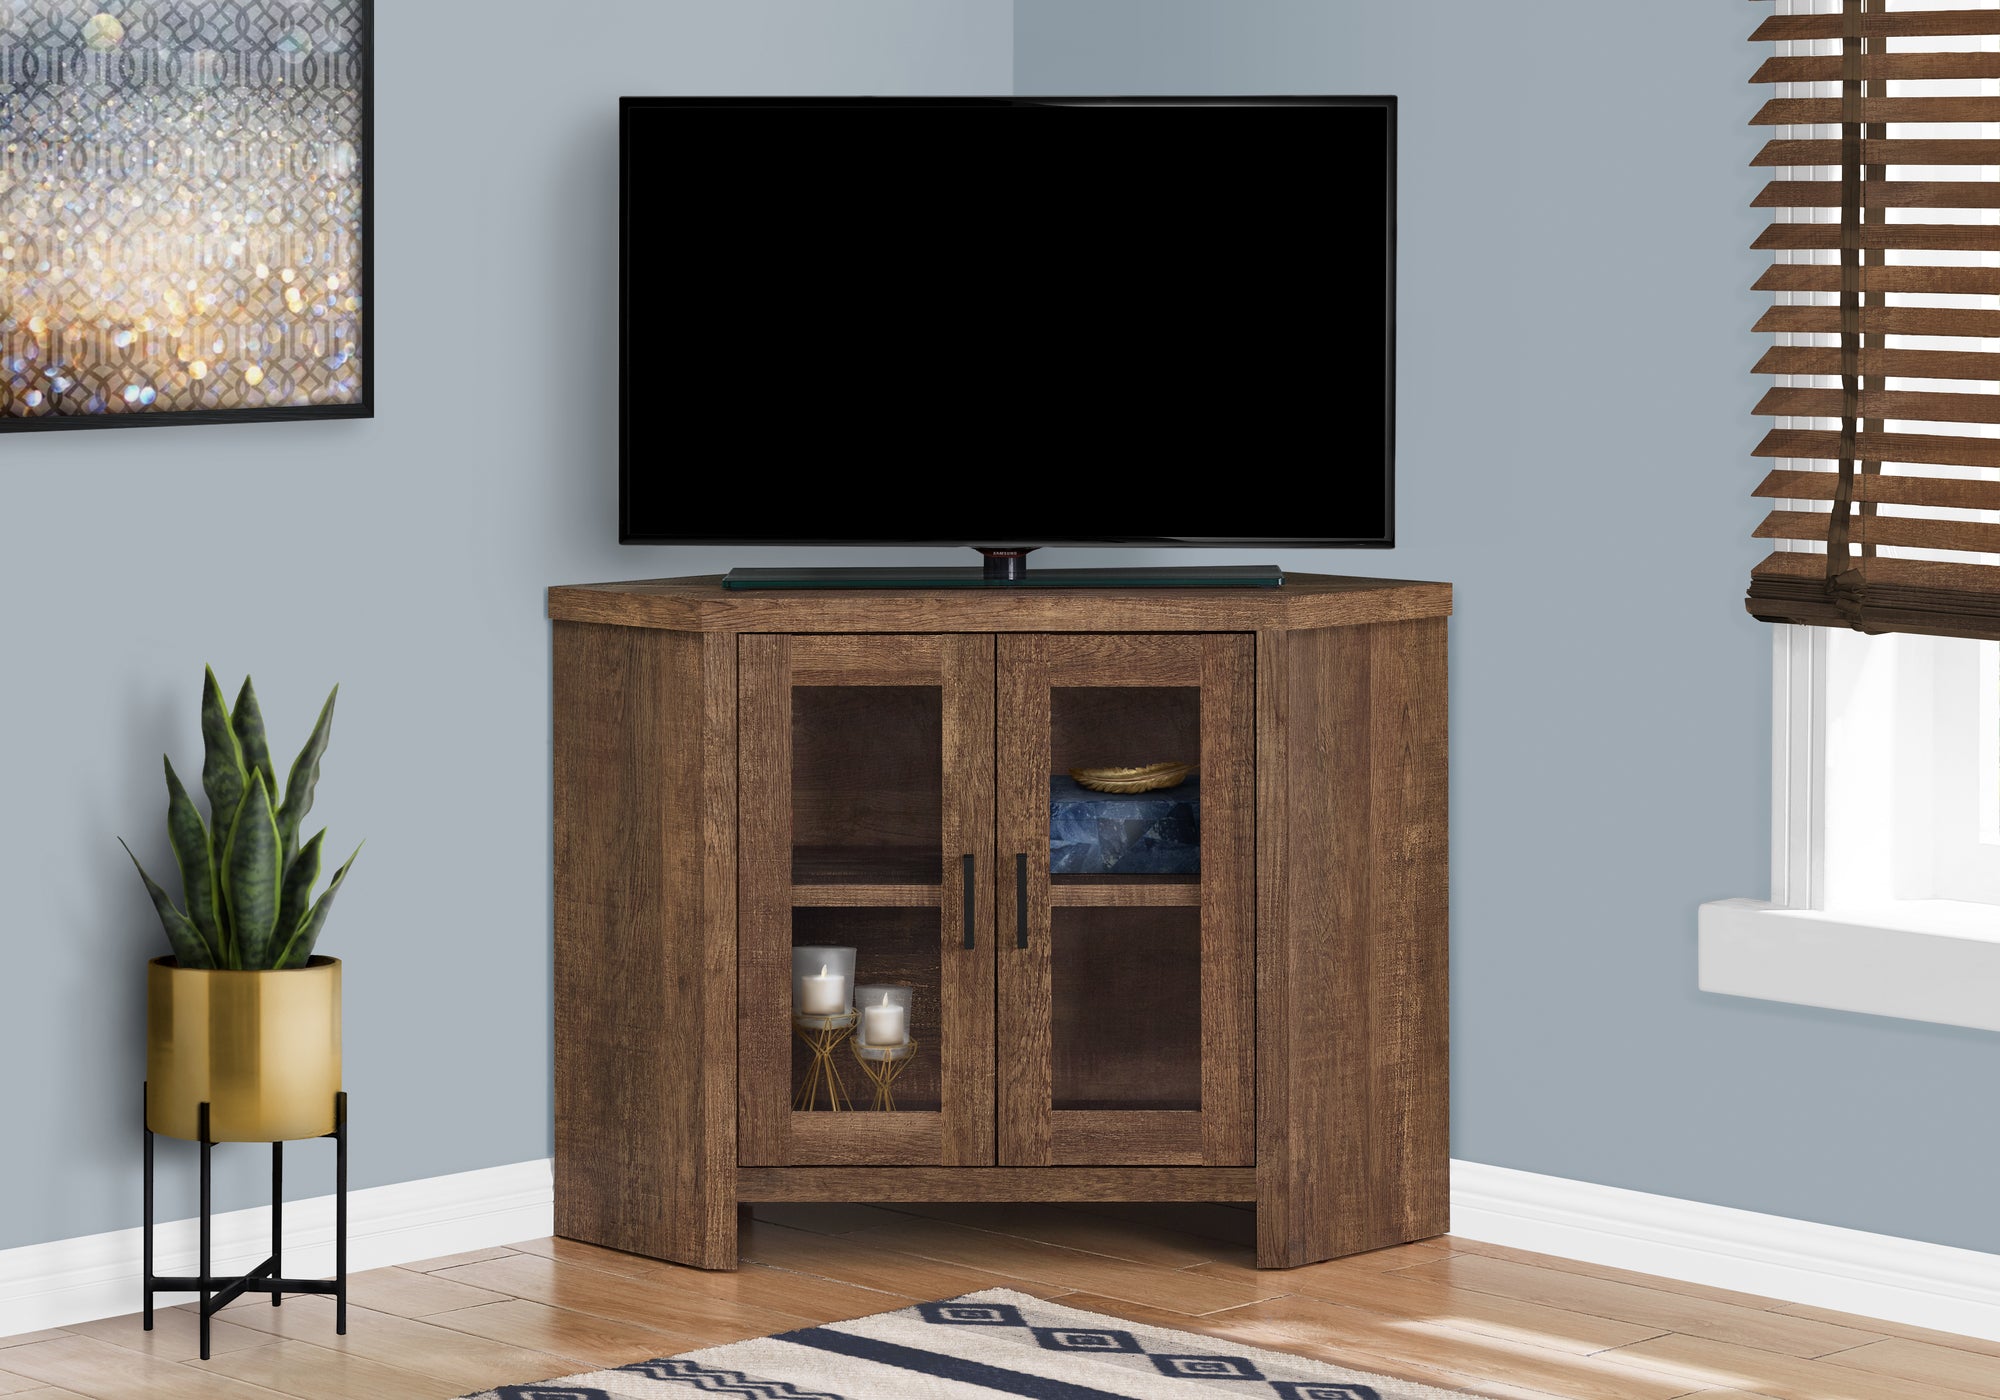 MN-952707    Tv Stand, 42Inch, Console, Media Entertainment Center, Storage Cabinet, Living Room, Bedroom, Laminate, Tempered Glass, Brown Reclaimed Wood Look, Contemporary, Modern